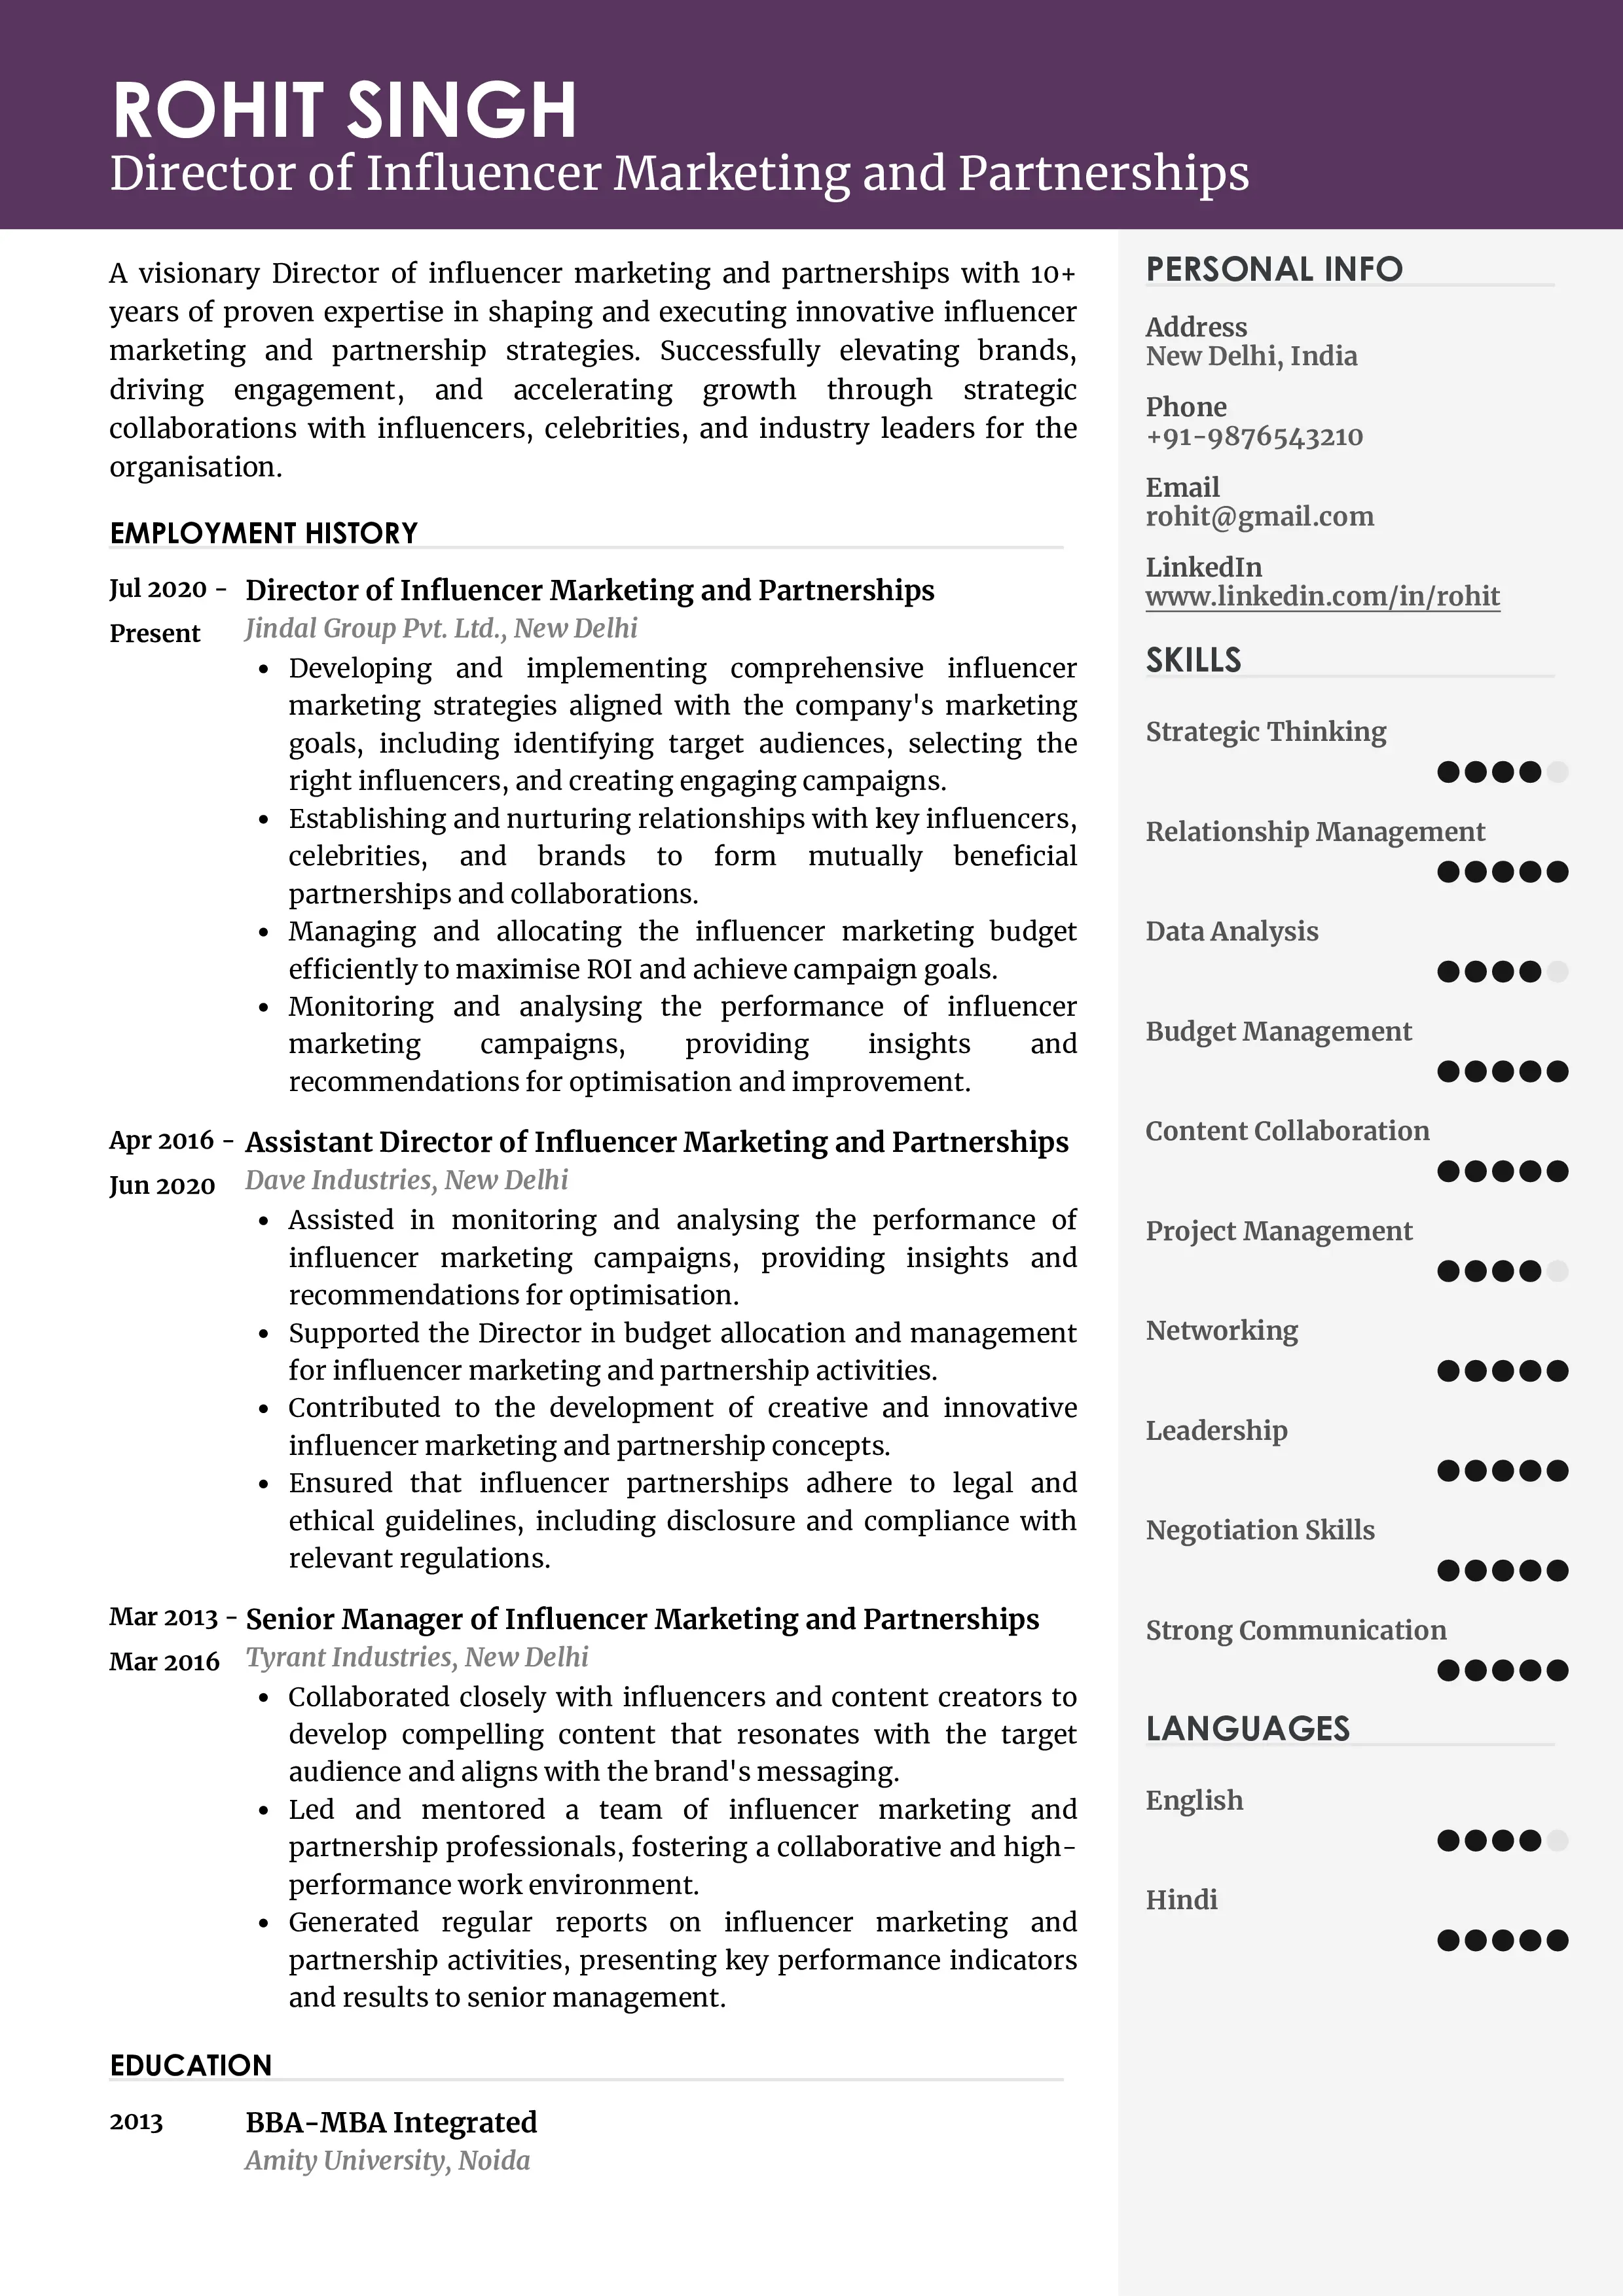 Sample Resume of Director of Influencer Marketing and Partnerships | Free Resume Templates & Samples on Resumod.co